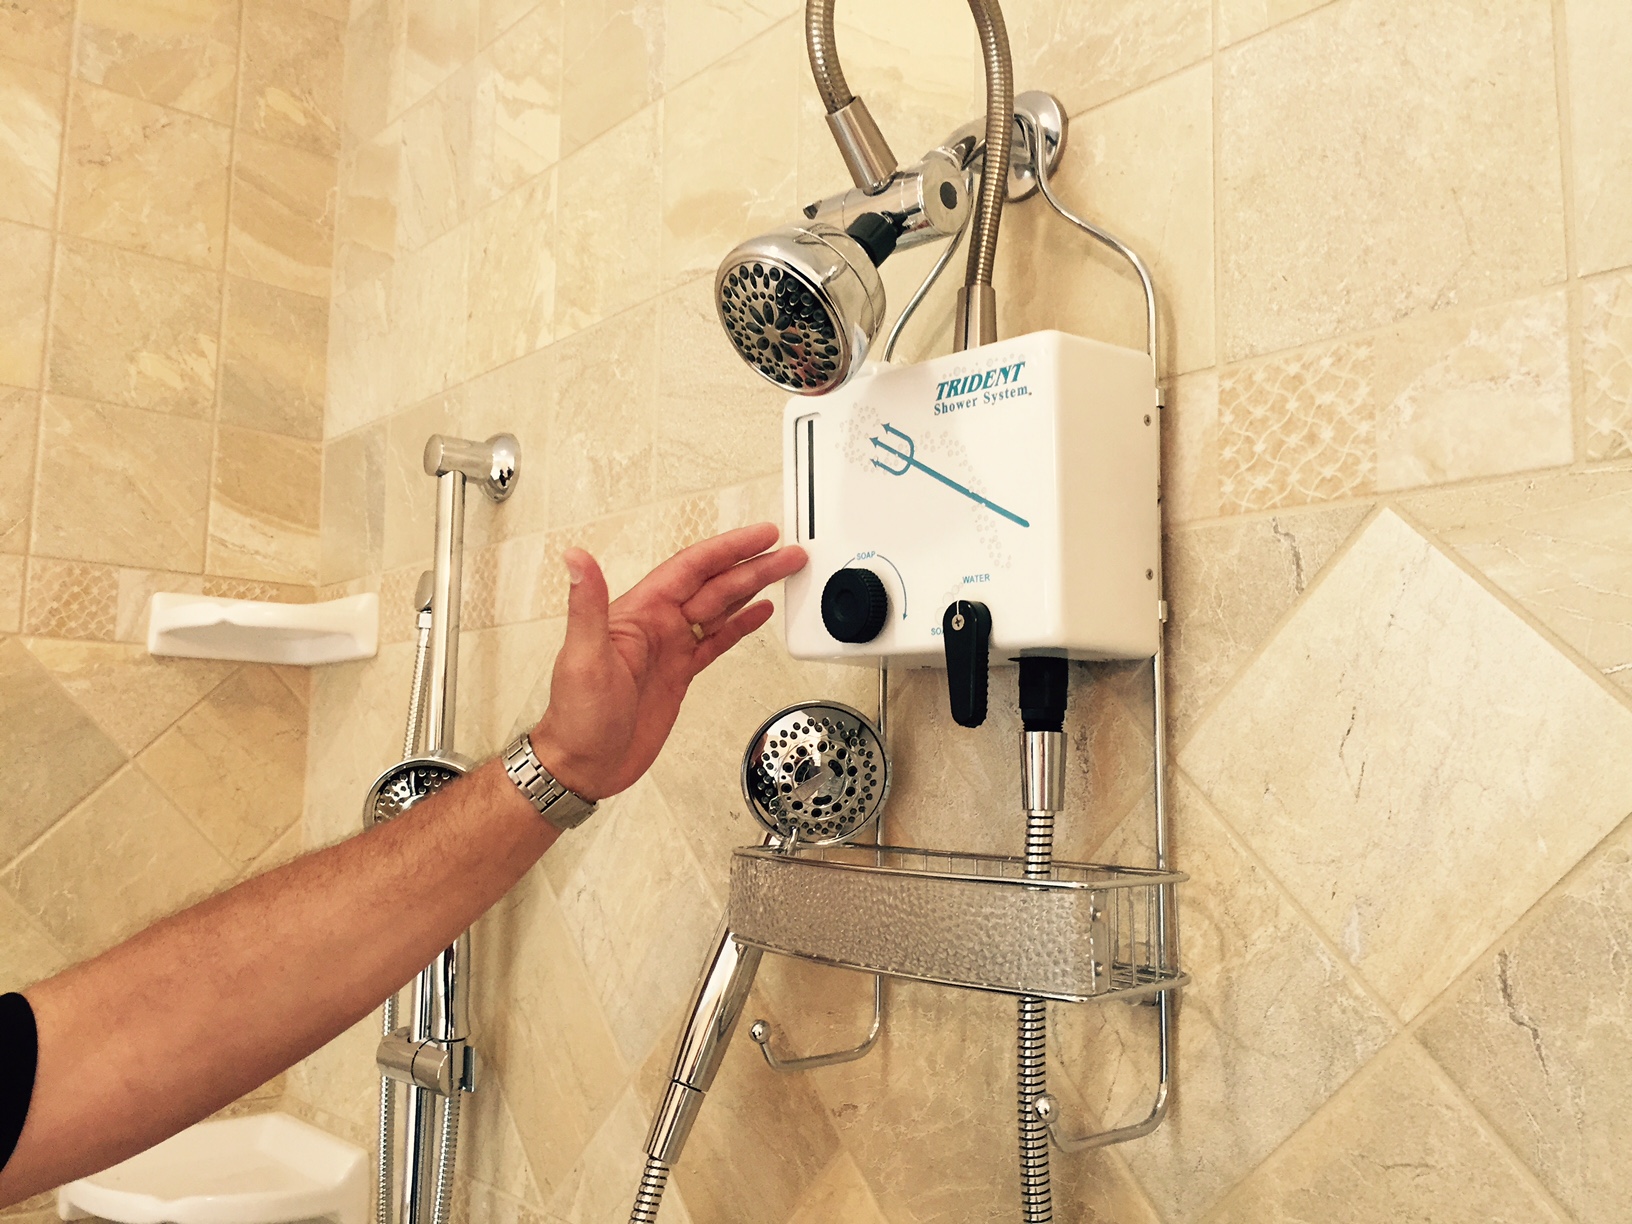 A high-tech shower in the bathroom. (WTOP/Max Smith)